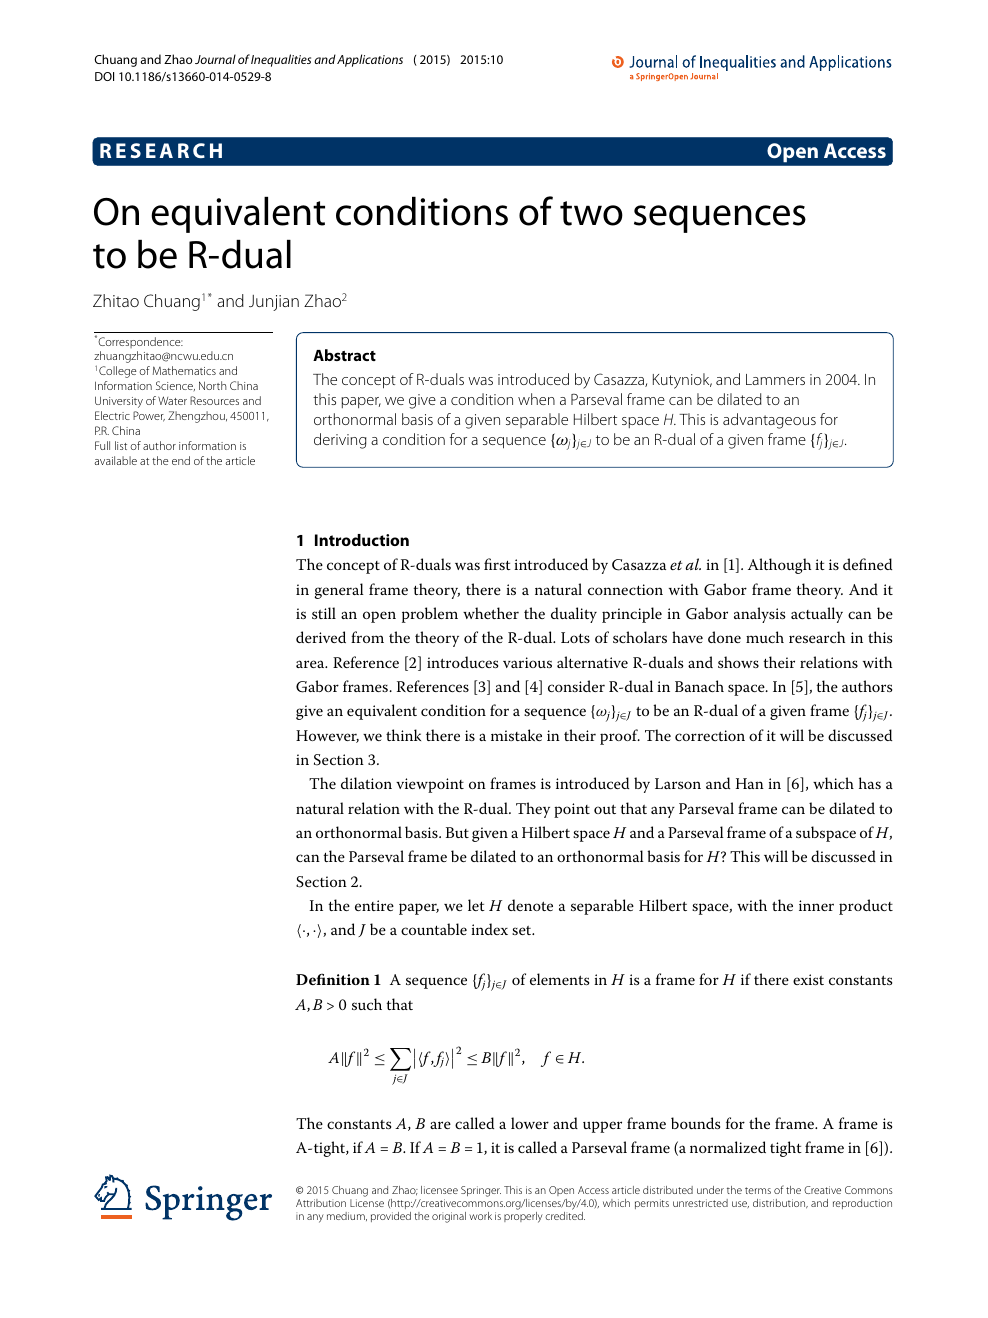 On Equivalent Conditions Of Two Sequences To Be R Dual Topic Of Research Paper In Mathematics Download Scholarly Article Pdf And Read For Free On Cyberleninka Open Science Hub